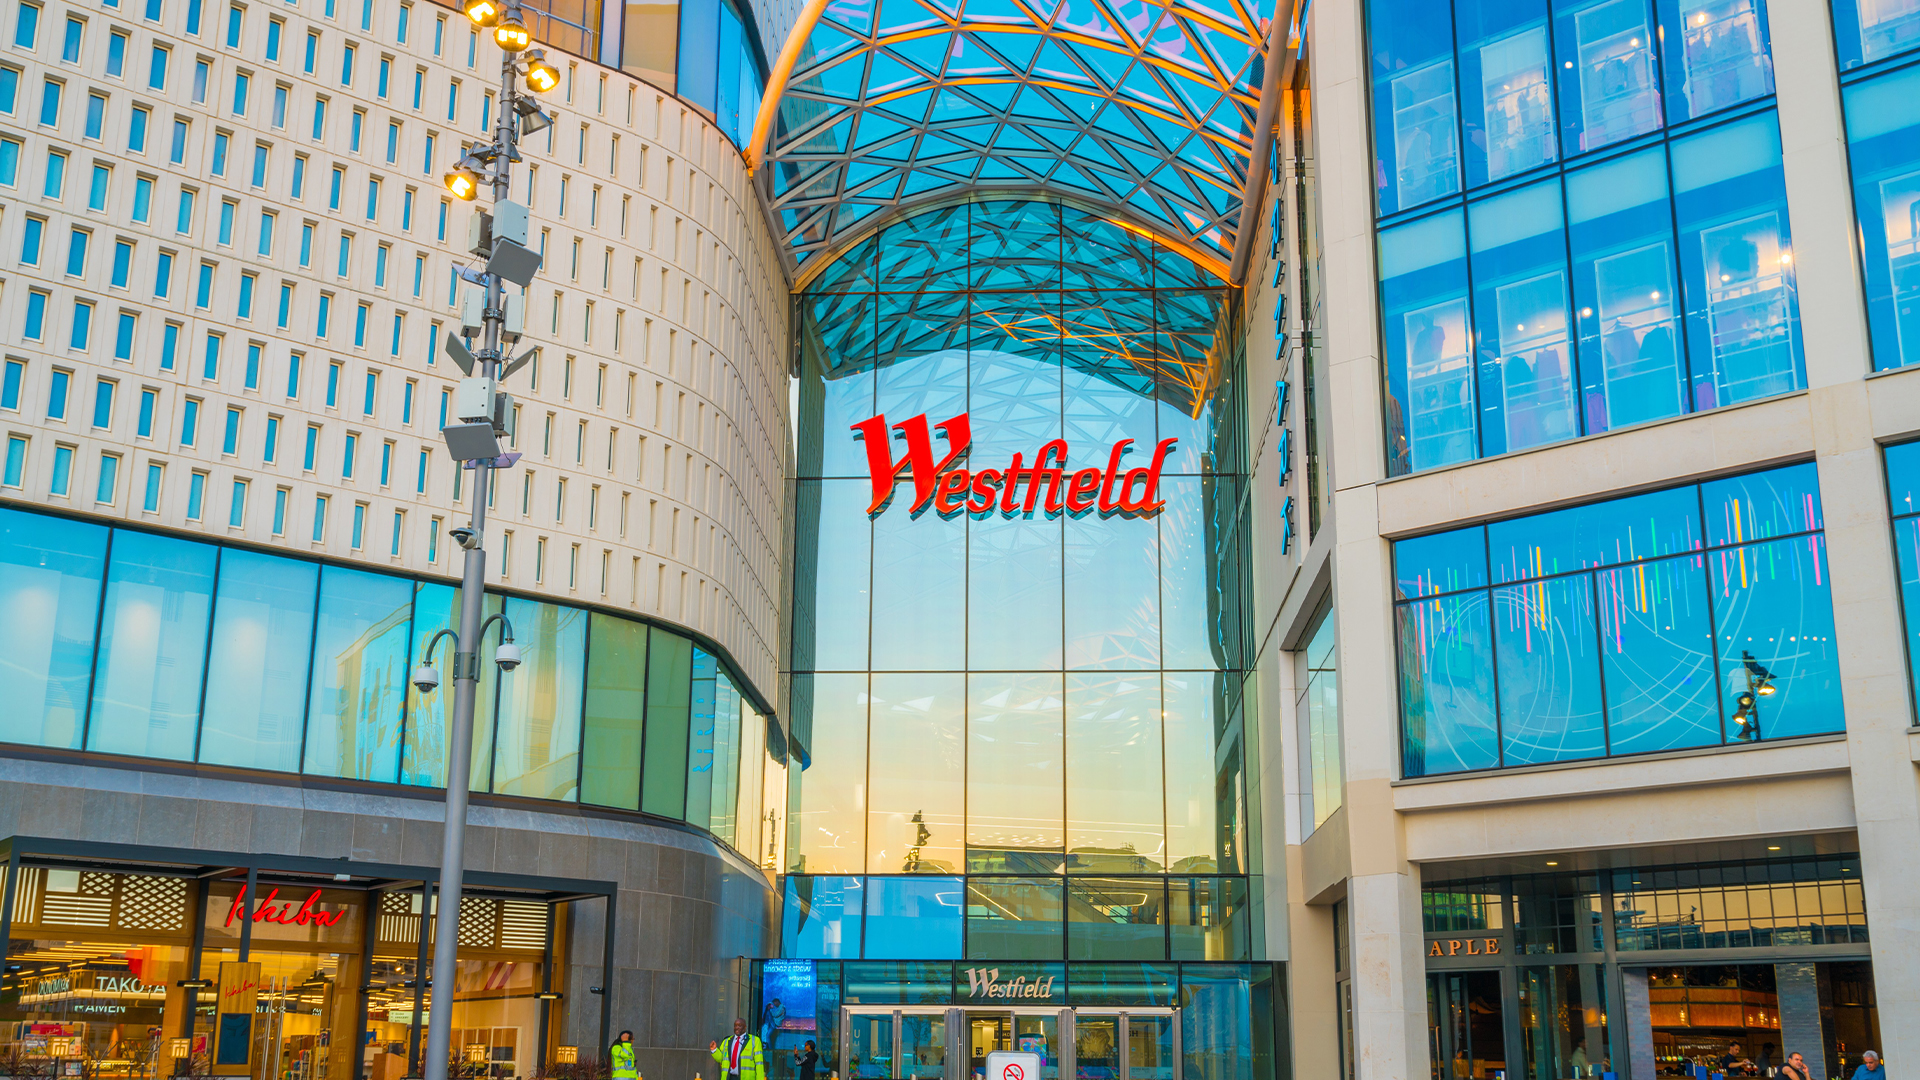 Westfield London is a Shopping Centre in White City, London, UK